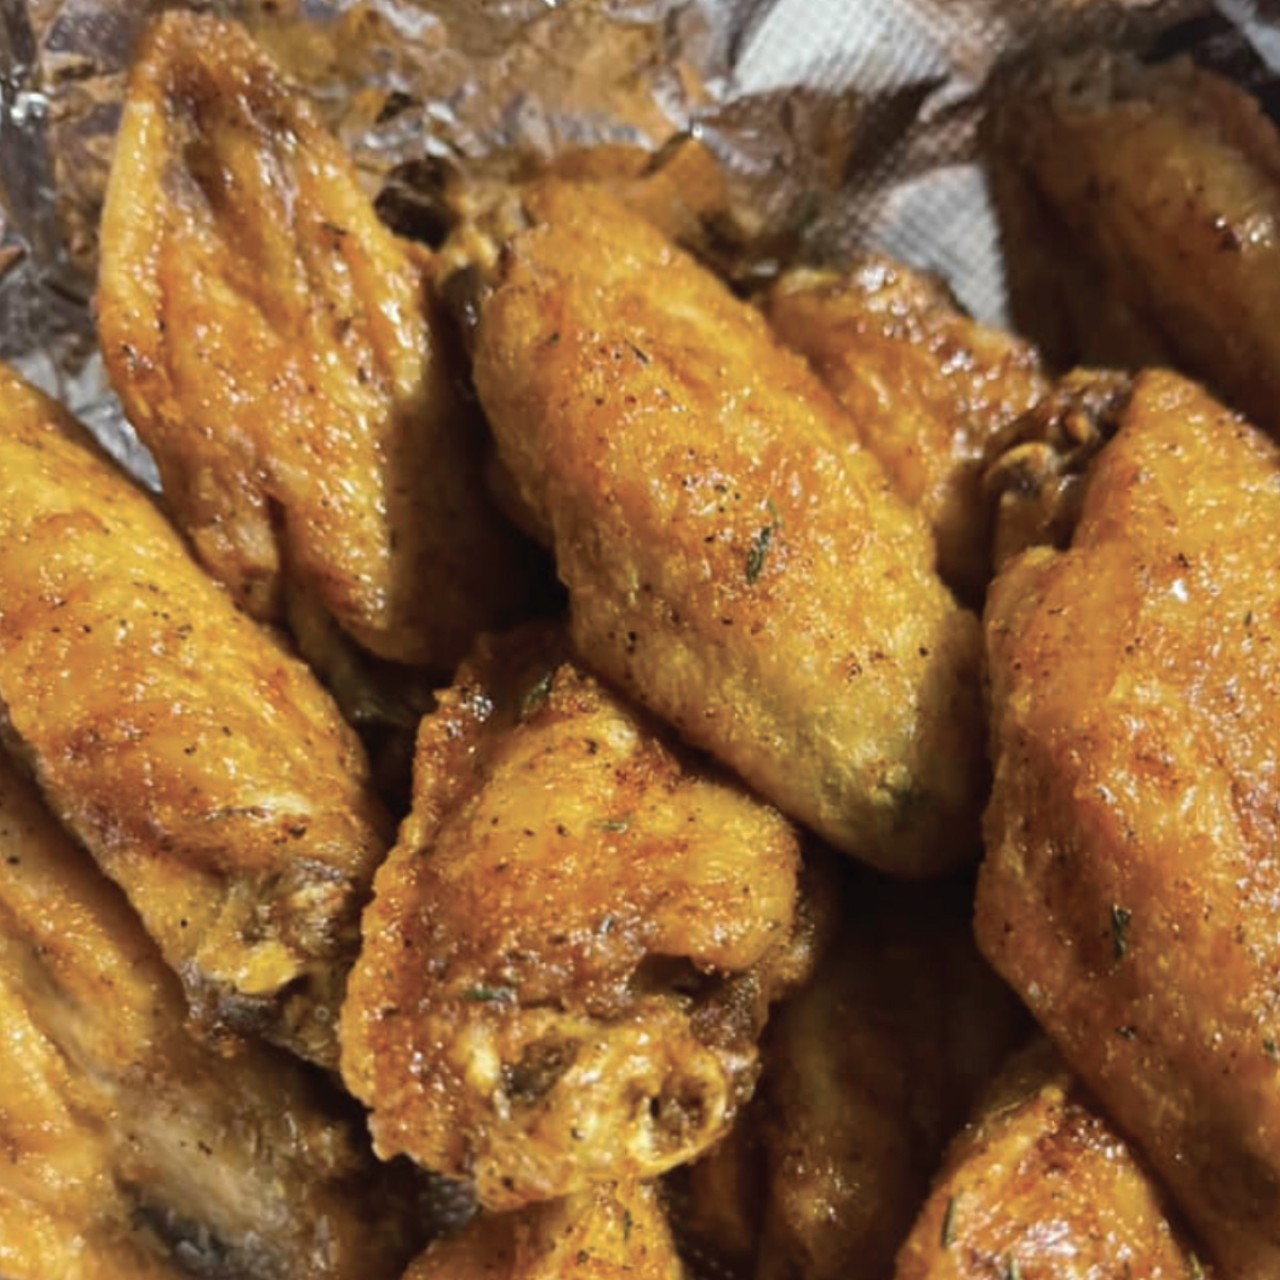  Nora’s Public House
4054 Erie St., Willoughby  
Nora’s in Willoughby is participating in wing week with their six traditional bone in wings, with a peach bourbon honey sriracha sauce. Miller Lite special of wings and a pint available for $10.